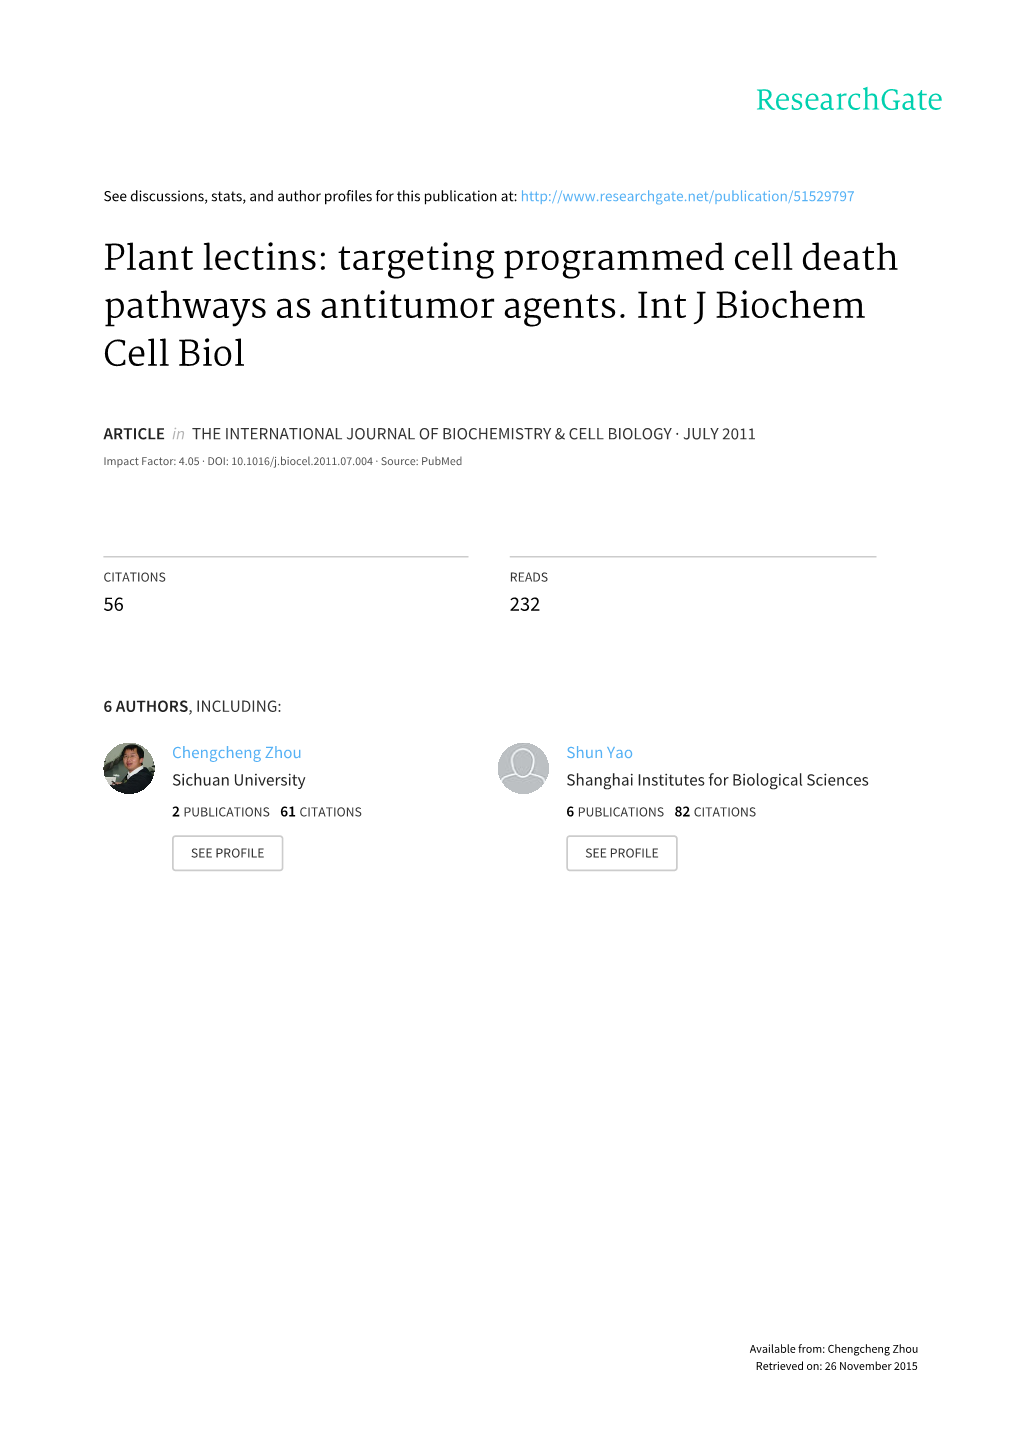 Plant Lectins: Targeting Programmed Cell Death Pathways As Antitumor Agents